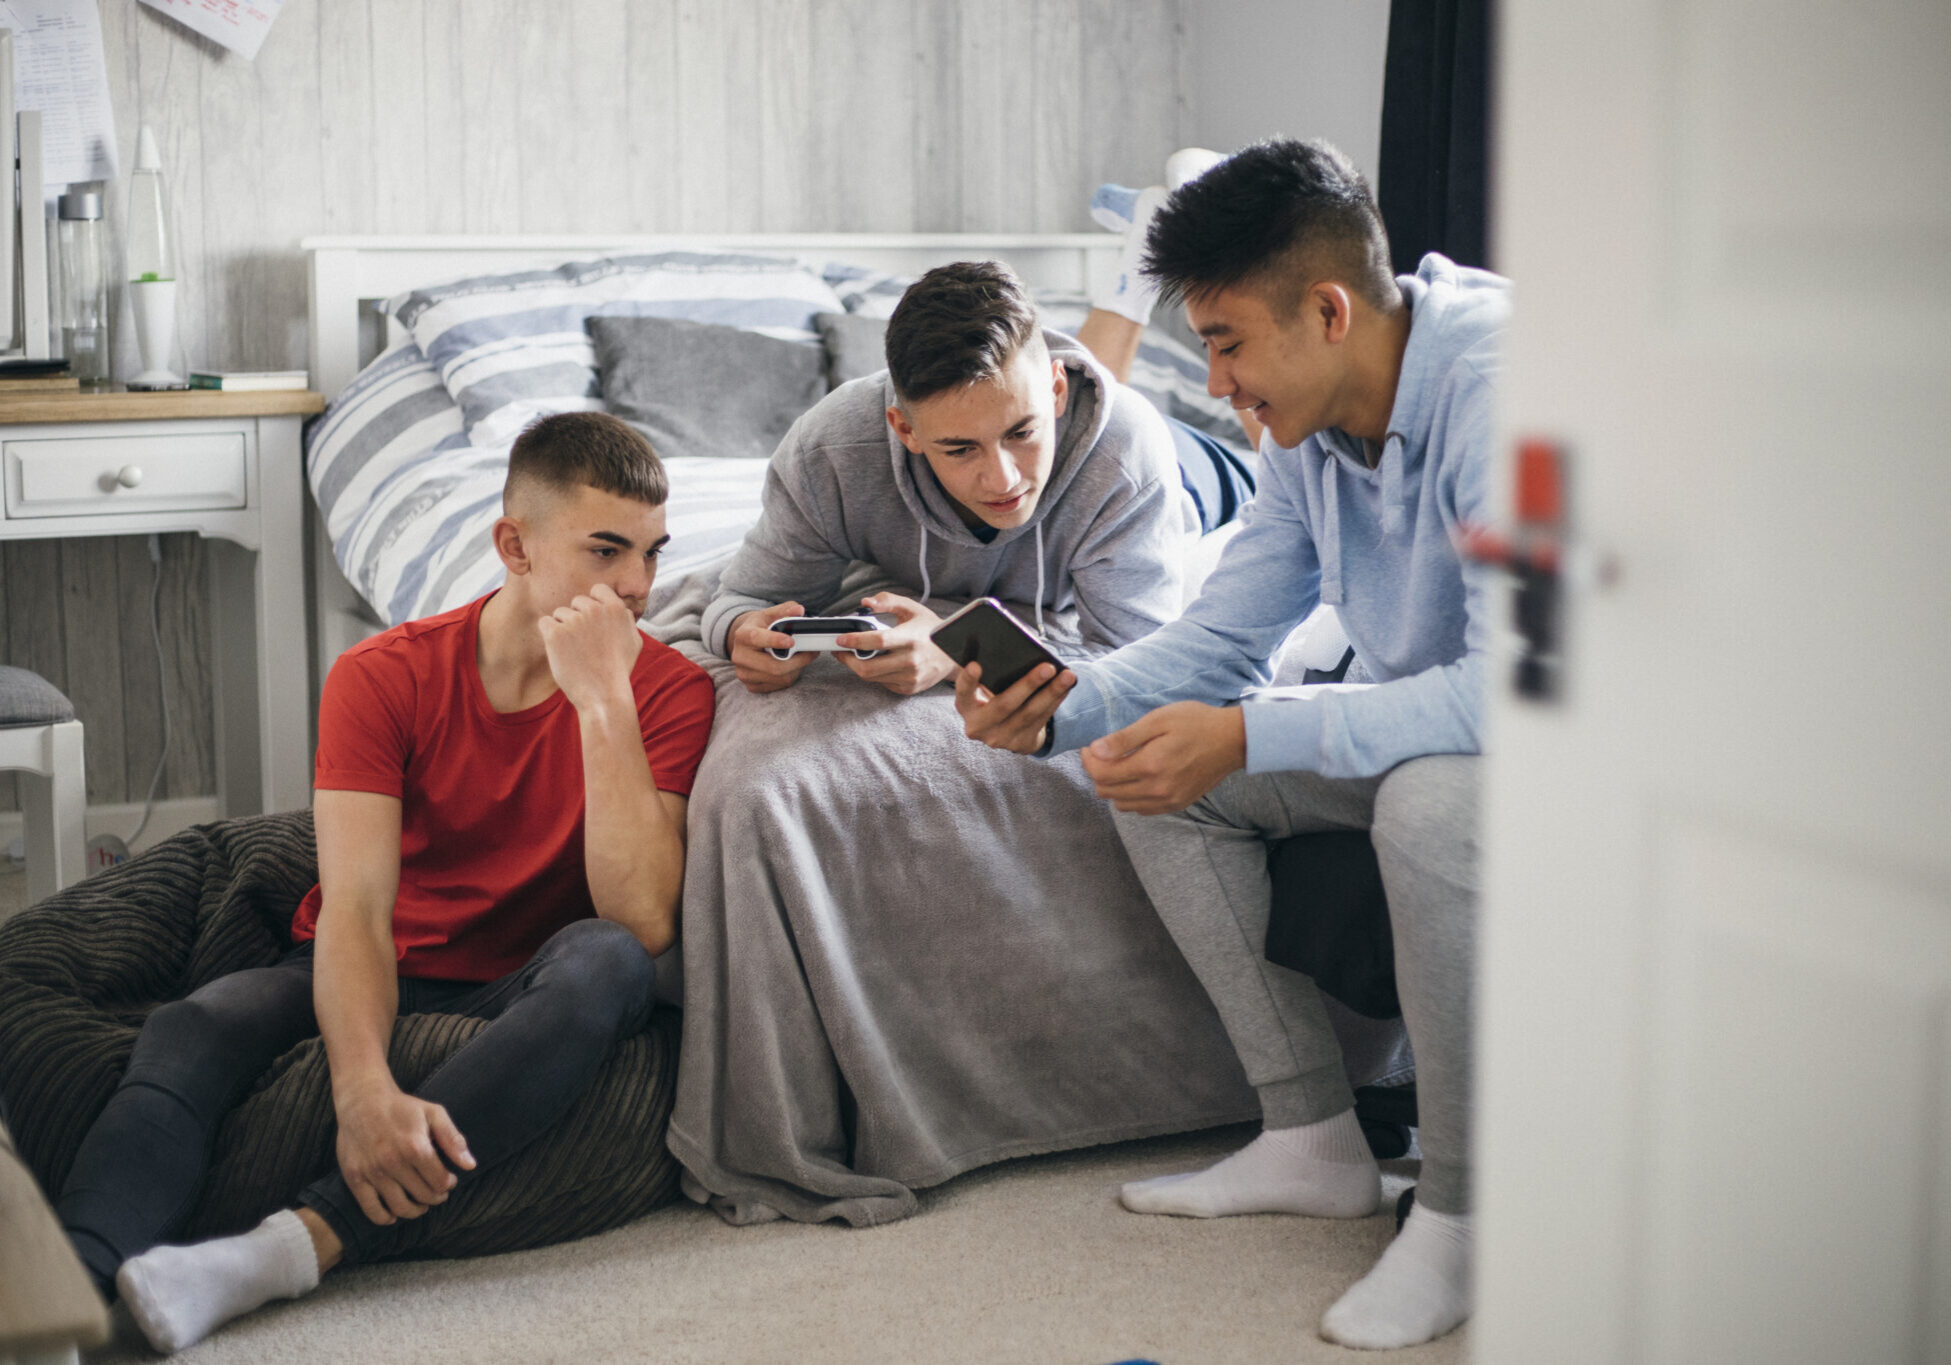 Three teenage boys relaxing and having fun while playing on a games console in a bedroom.